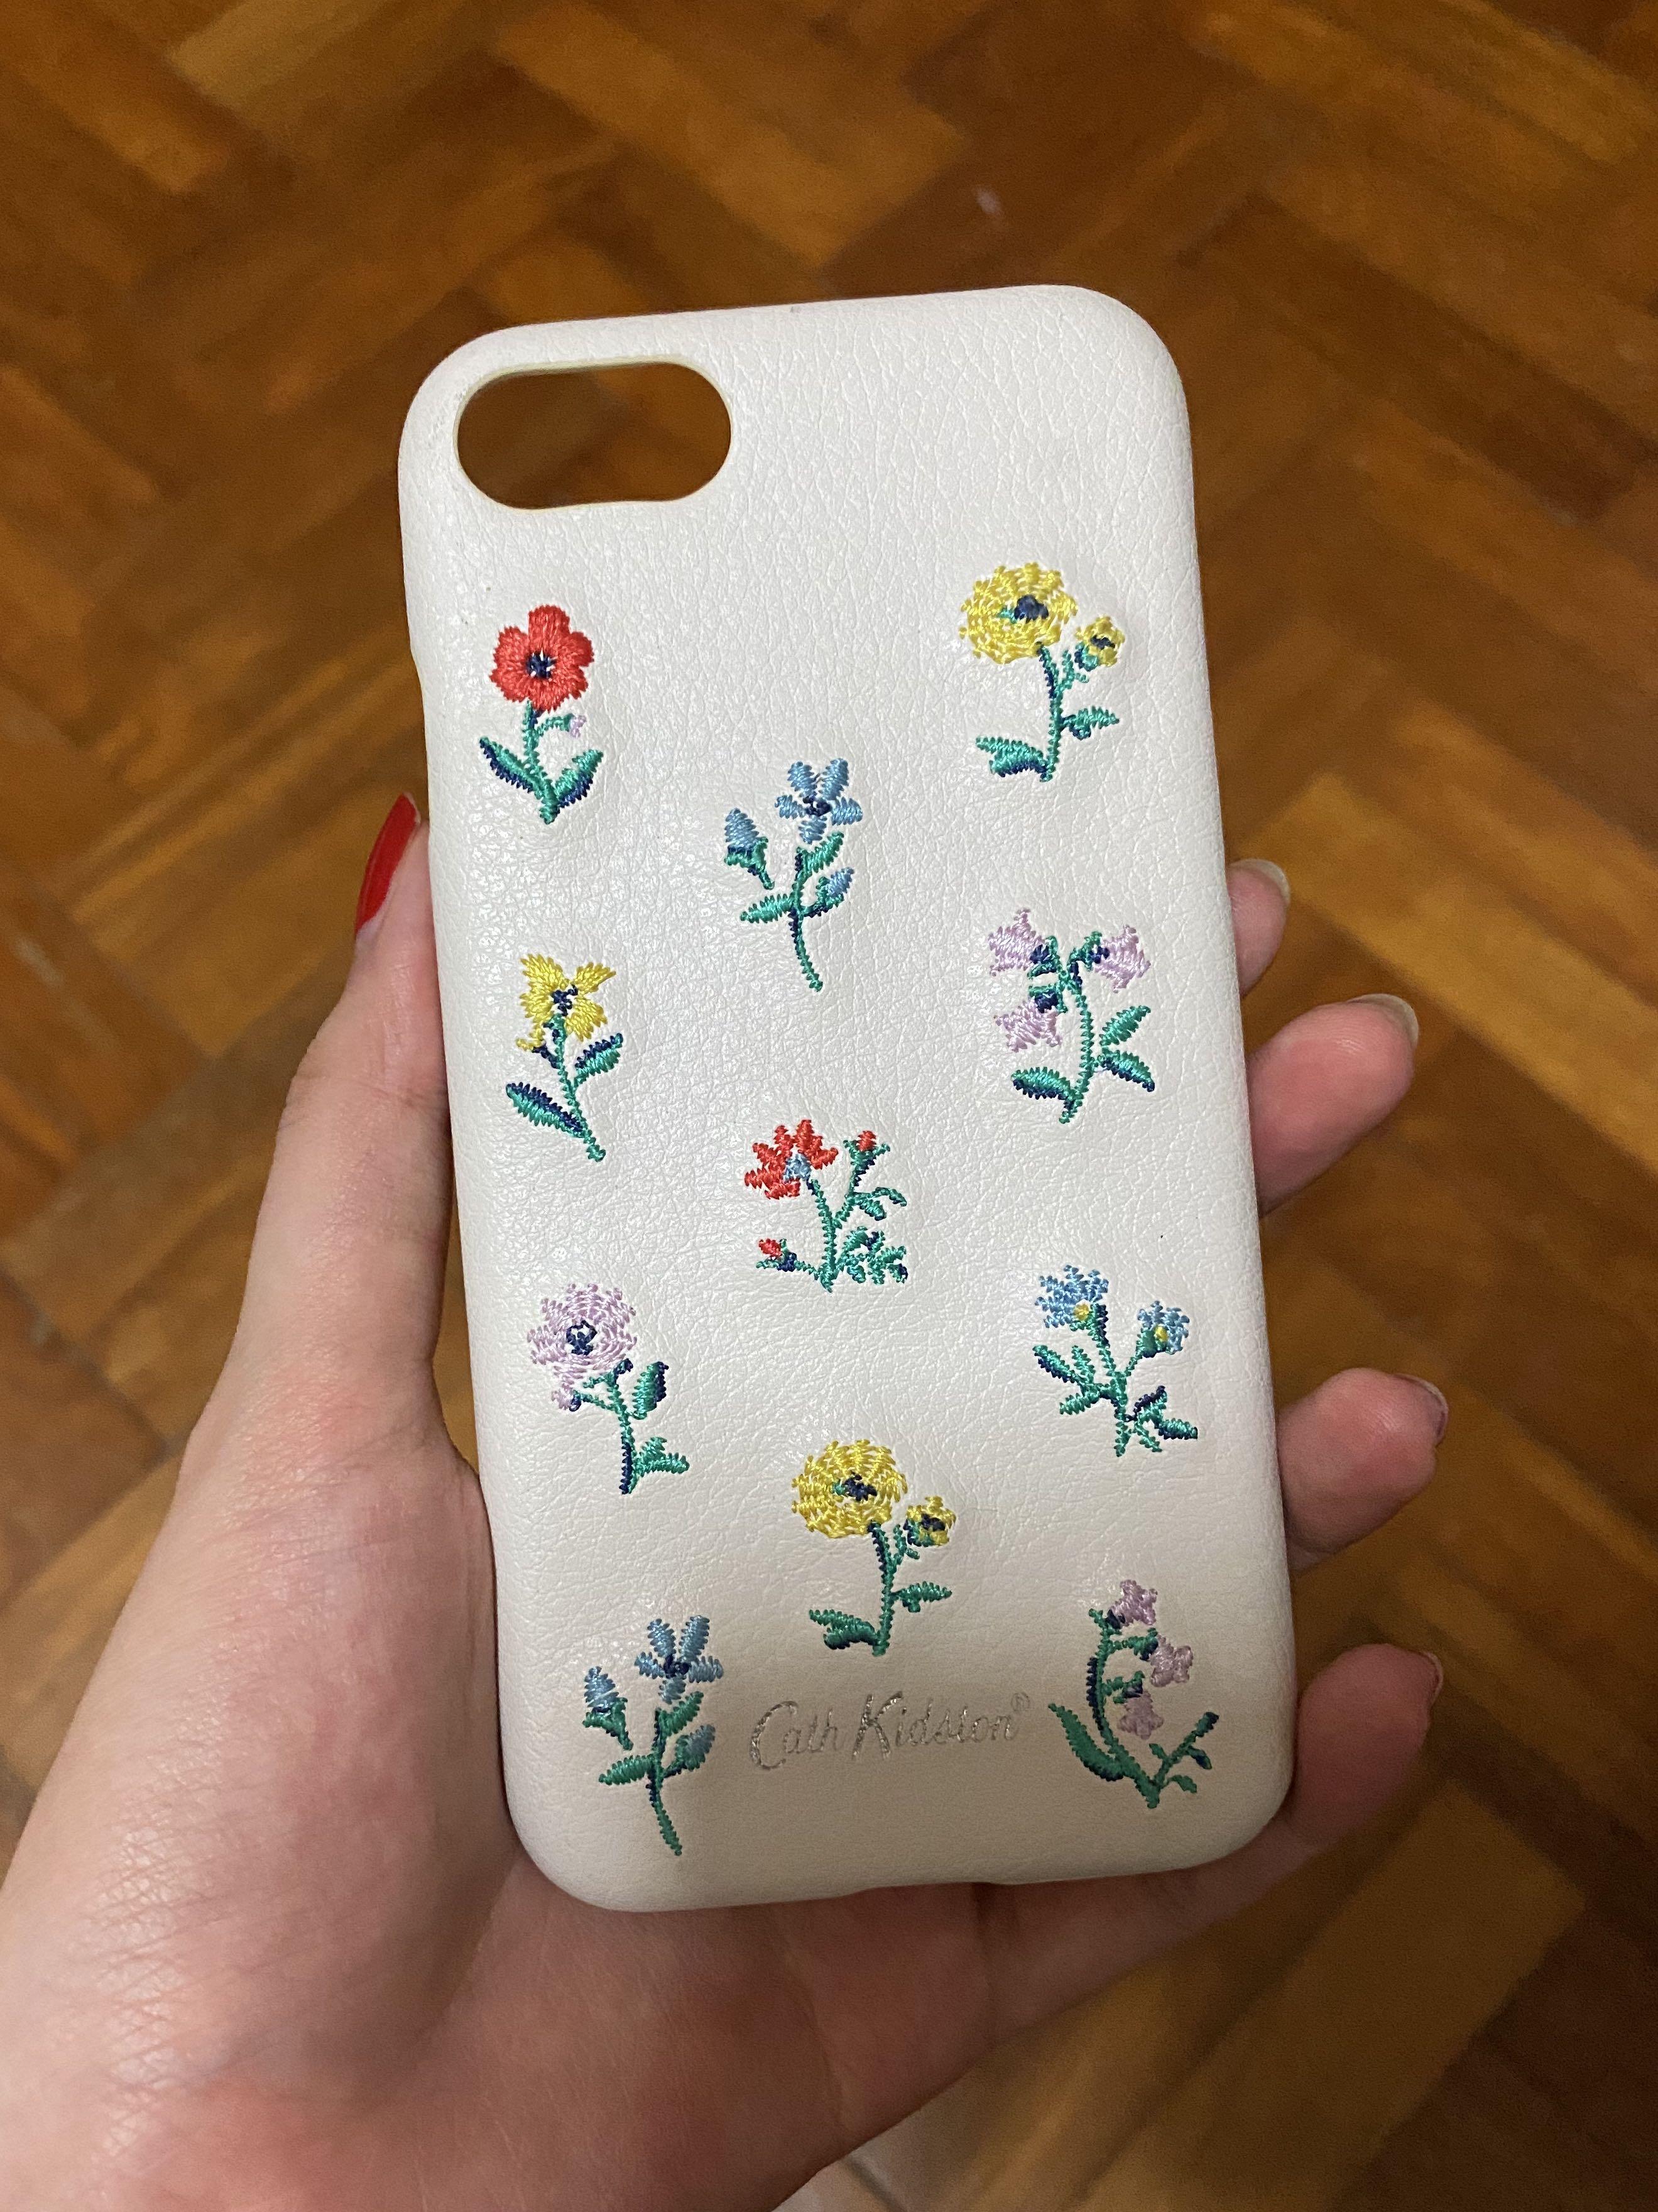 Cath Kidston - IPhone 8 embroidered 